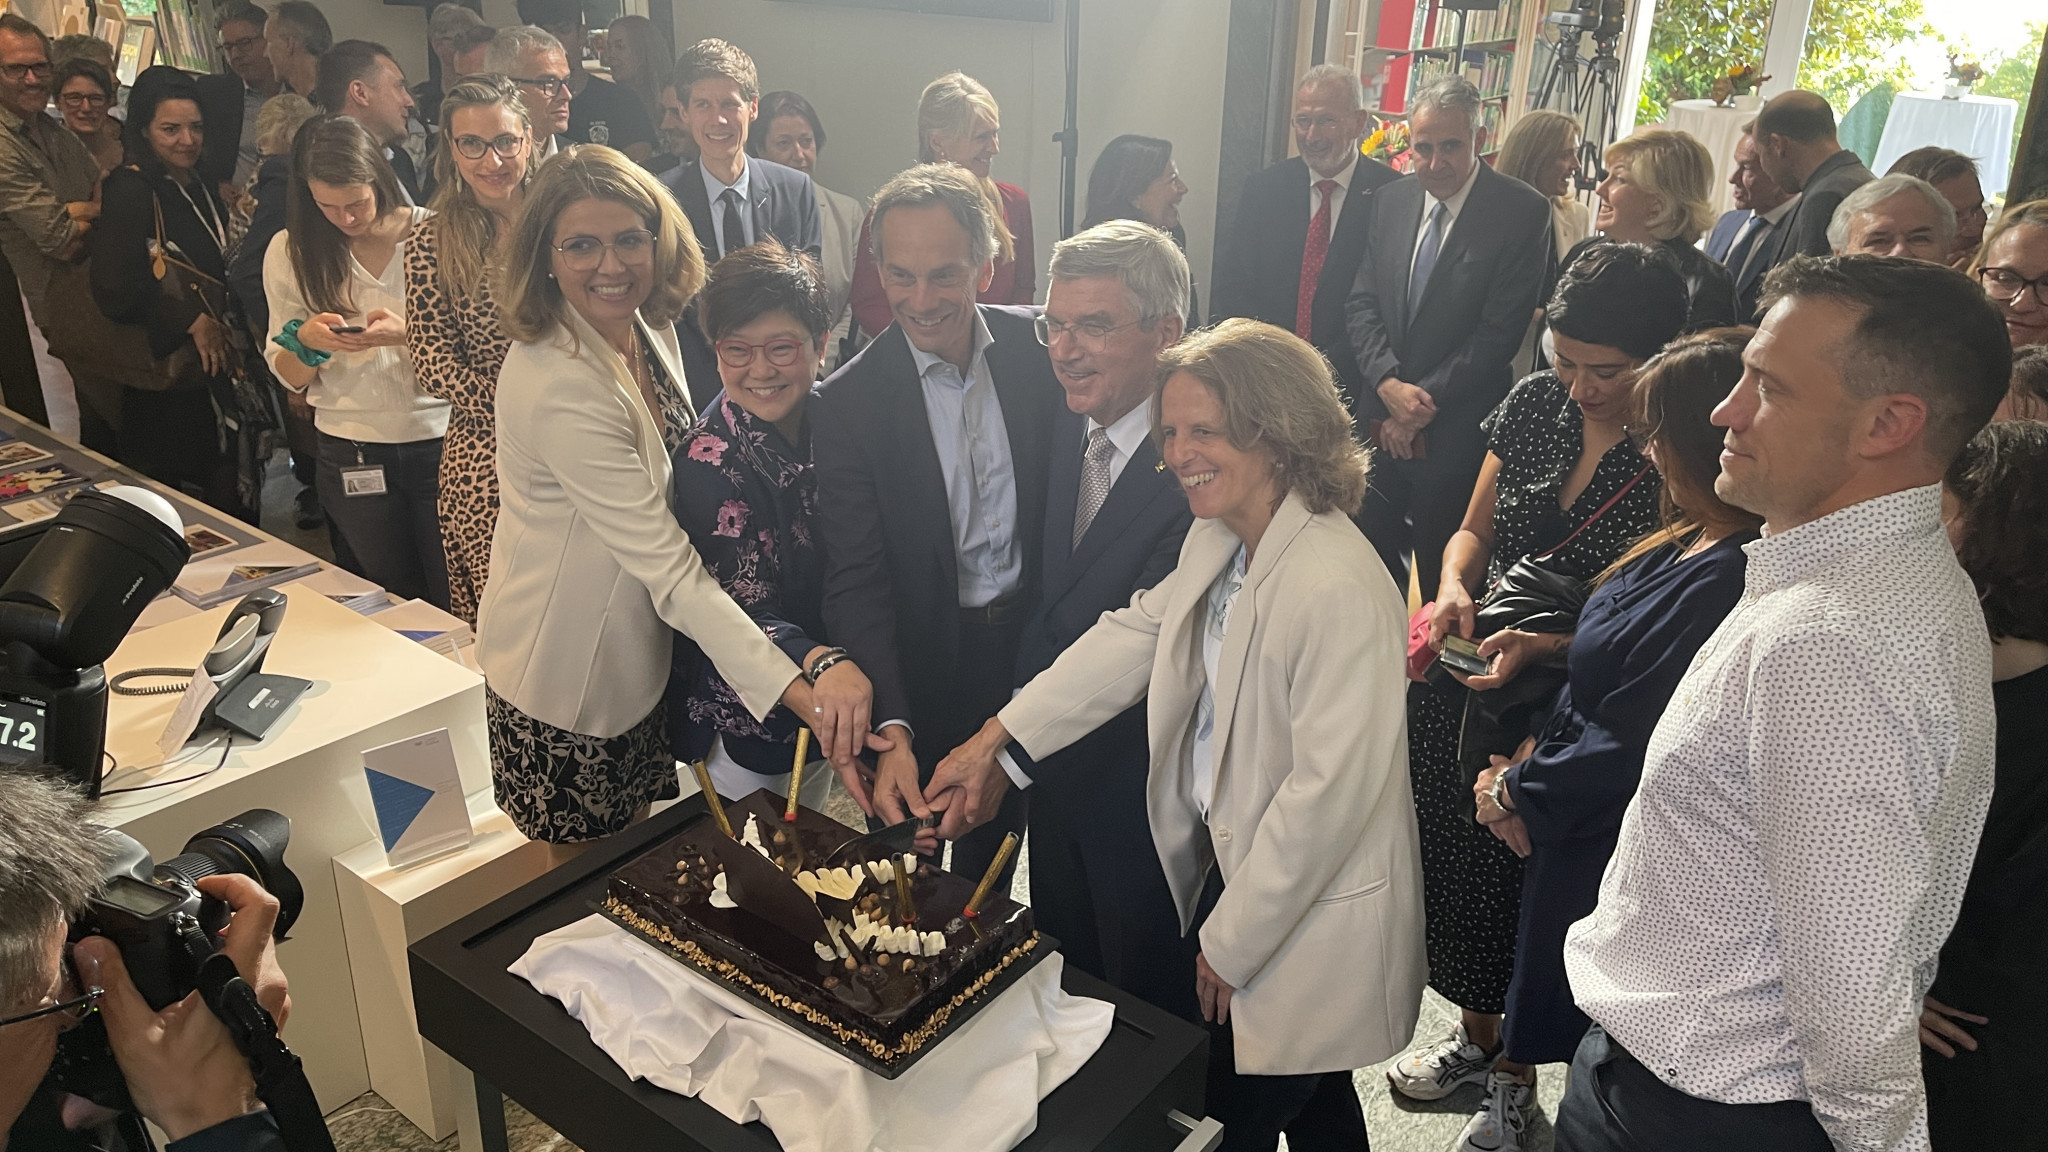 IOC President Thomas Bach helps cut the cake to celebrate 40 years of the Olympic Studies Centre in Lausanne ©Markus Osterwalder International Society of Olympic Historians